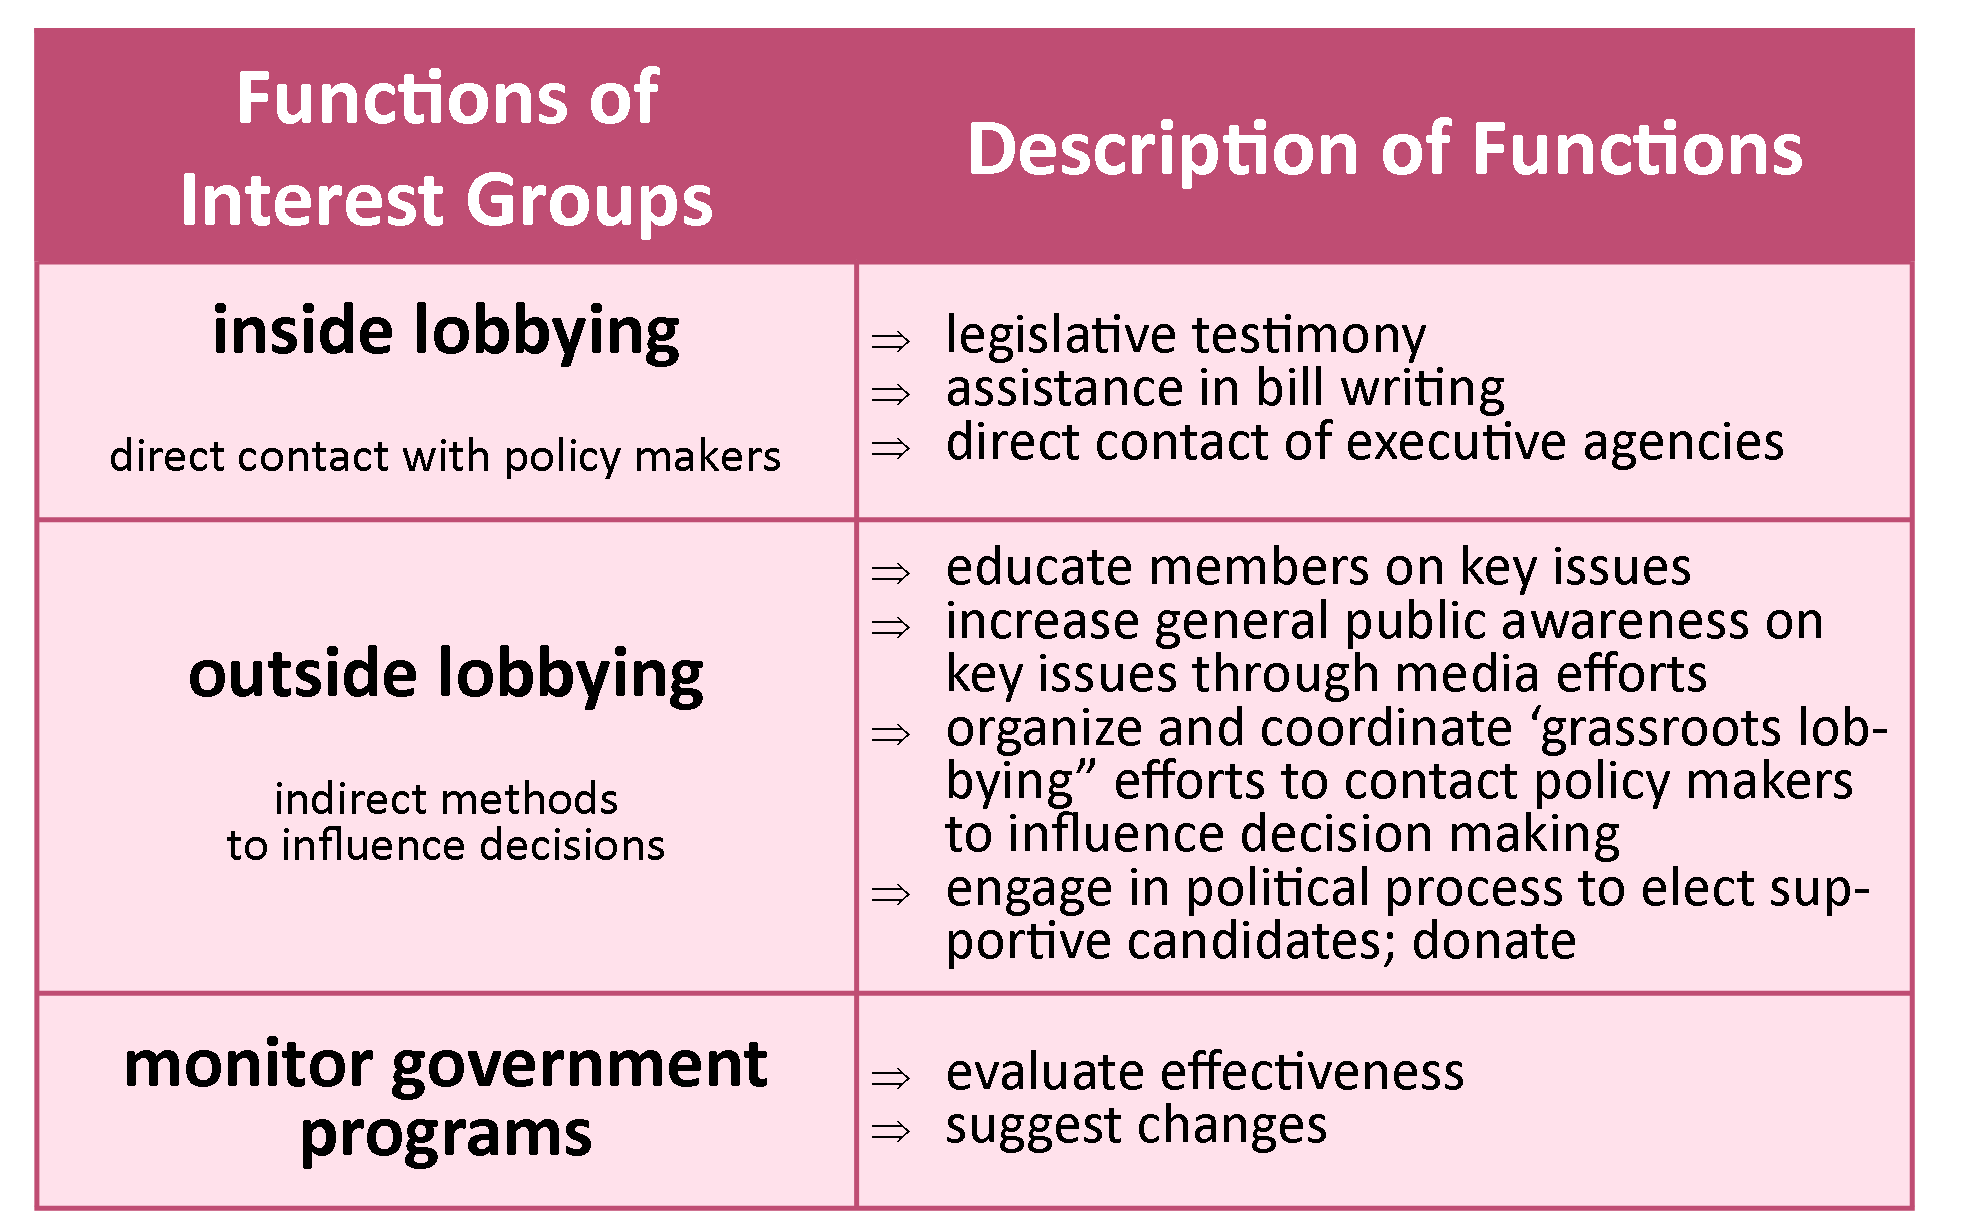 Chart illustrating functions of interest groups including inside lobbying, outside lobbying, and monitoring of government programs.